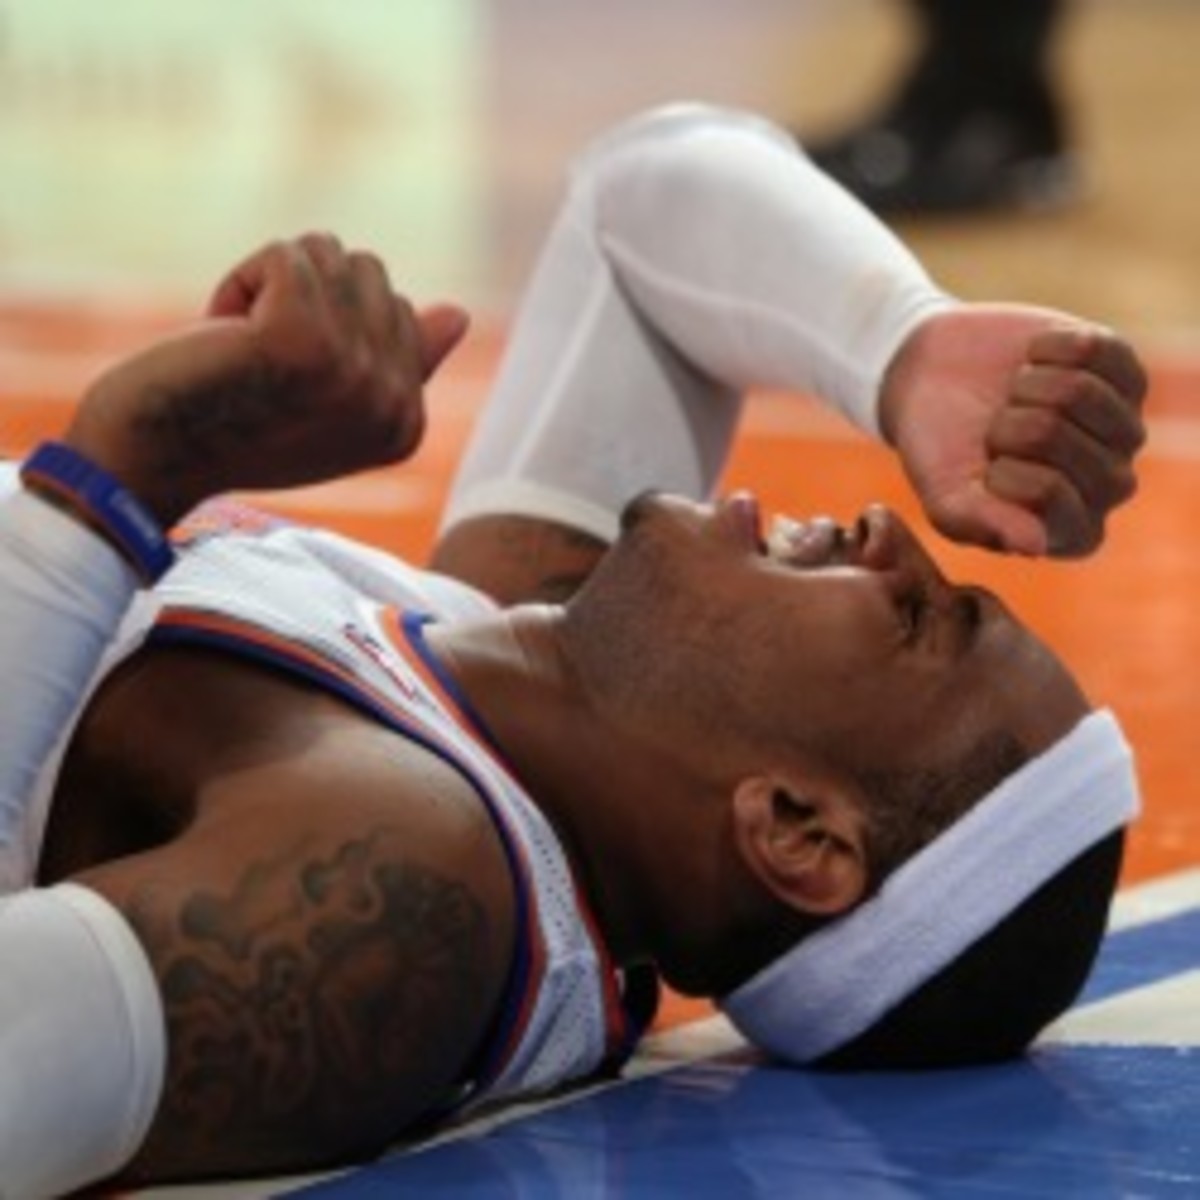 Knicks forward Carmelo Anthony will miss his second straight game with a sore ankle. (Bruce Bennett/Getty Images)